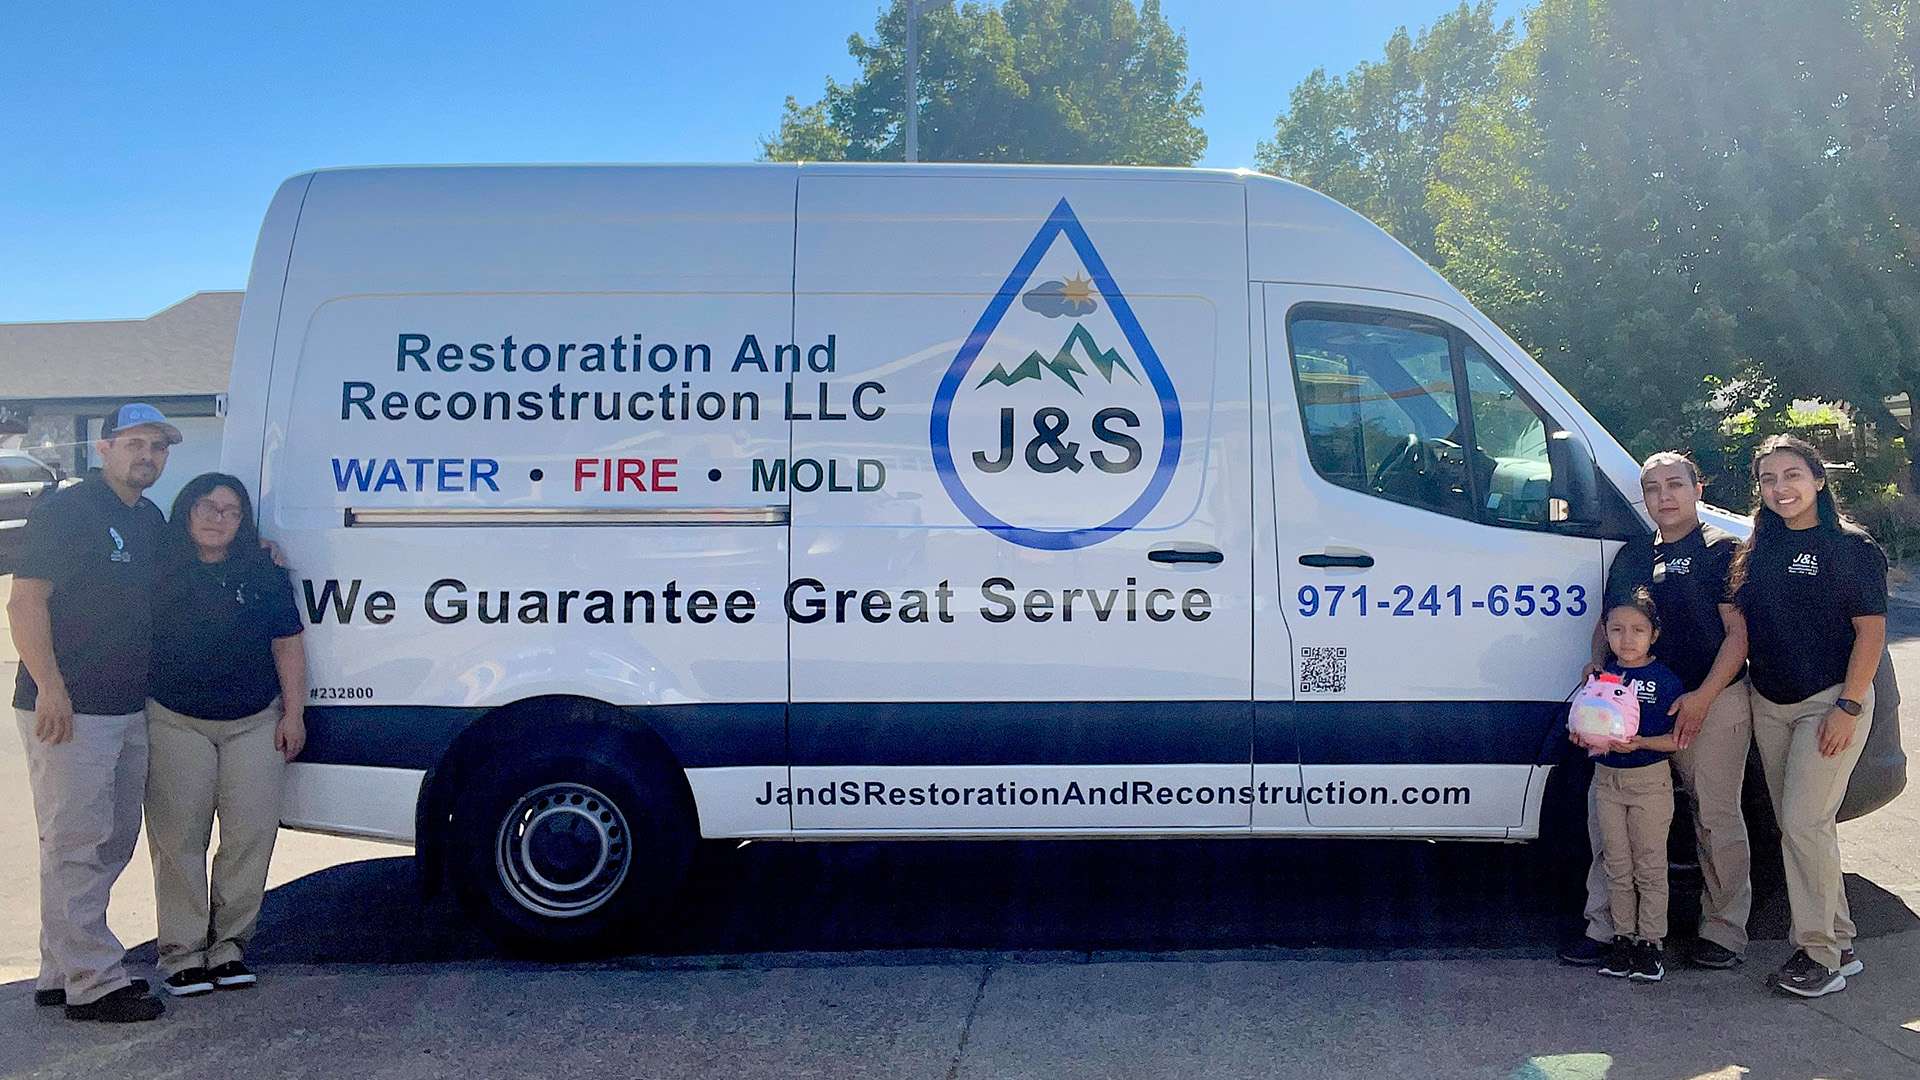 J&S Restoration and Reconstruction Crew with Water, Fire, Mold Disaster Van